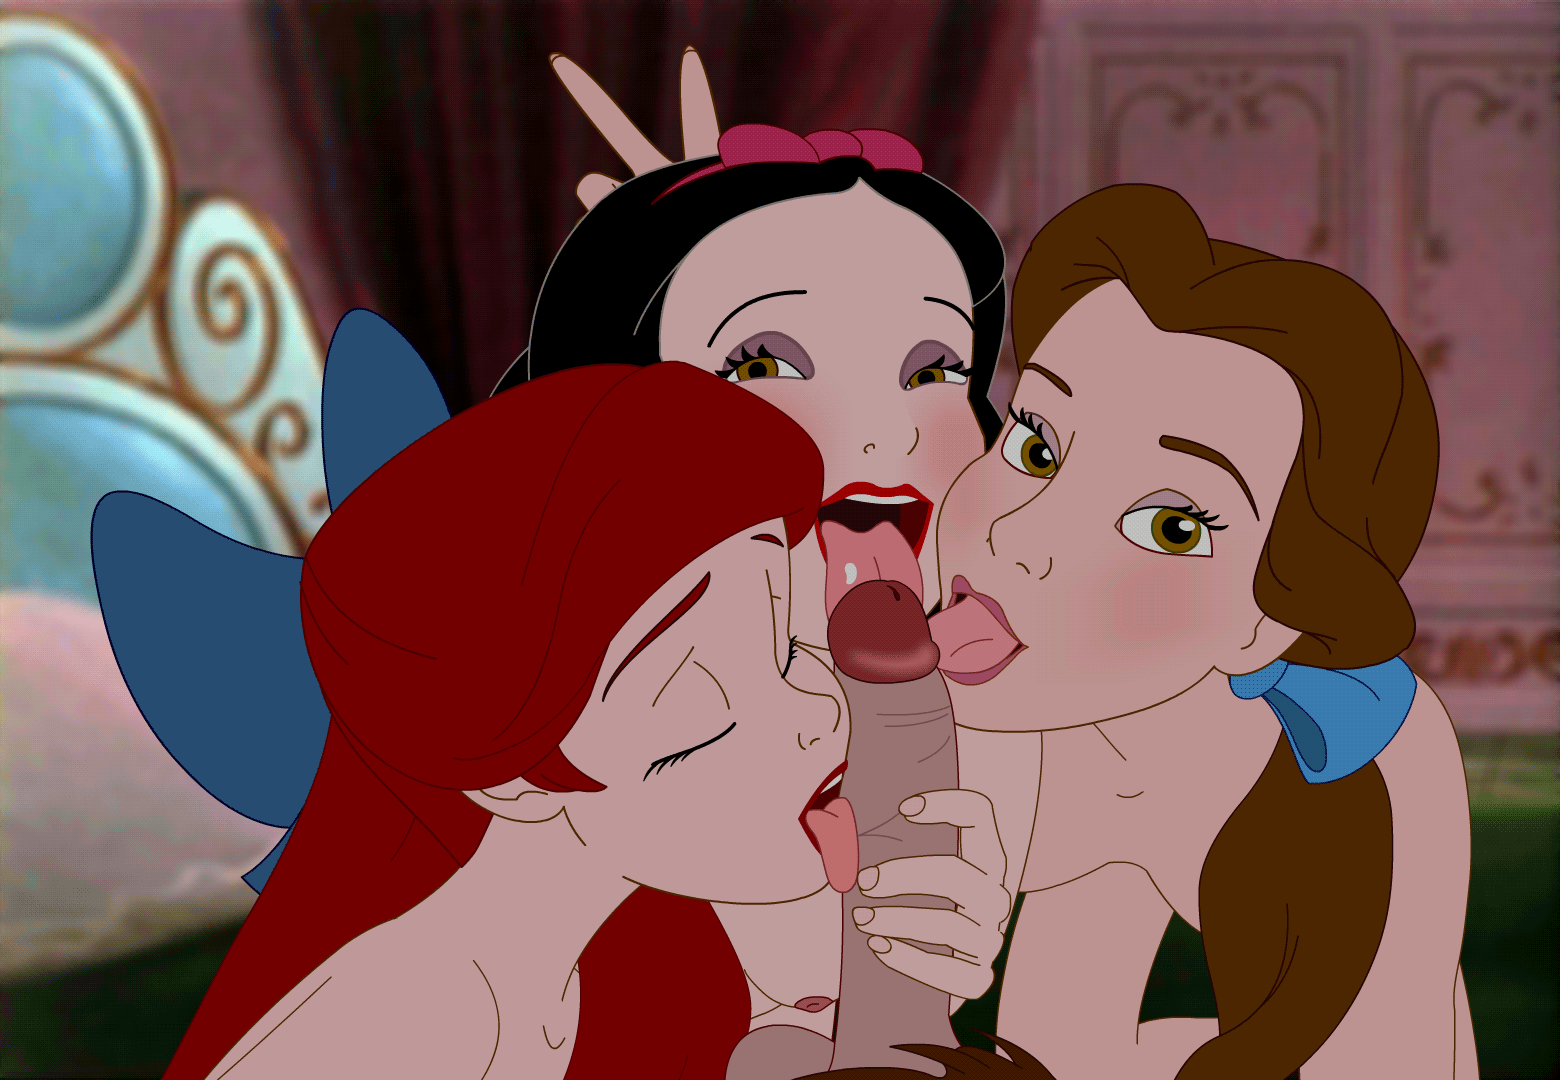 Sex porn. info gif obliging disney princesses 636ac4d3a73c0 about aiag. Enjoy watching new porn gifs every day